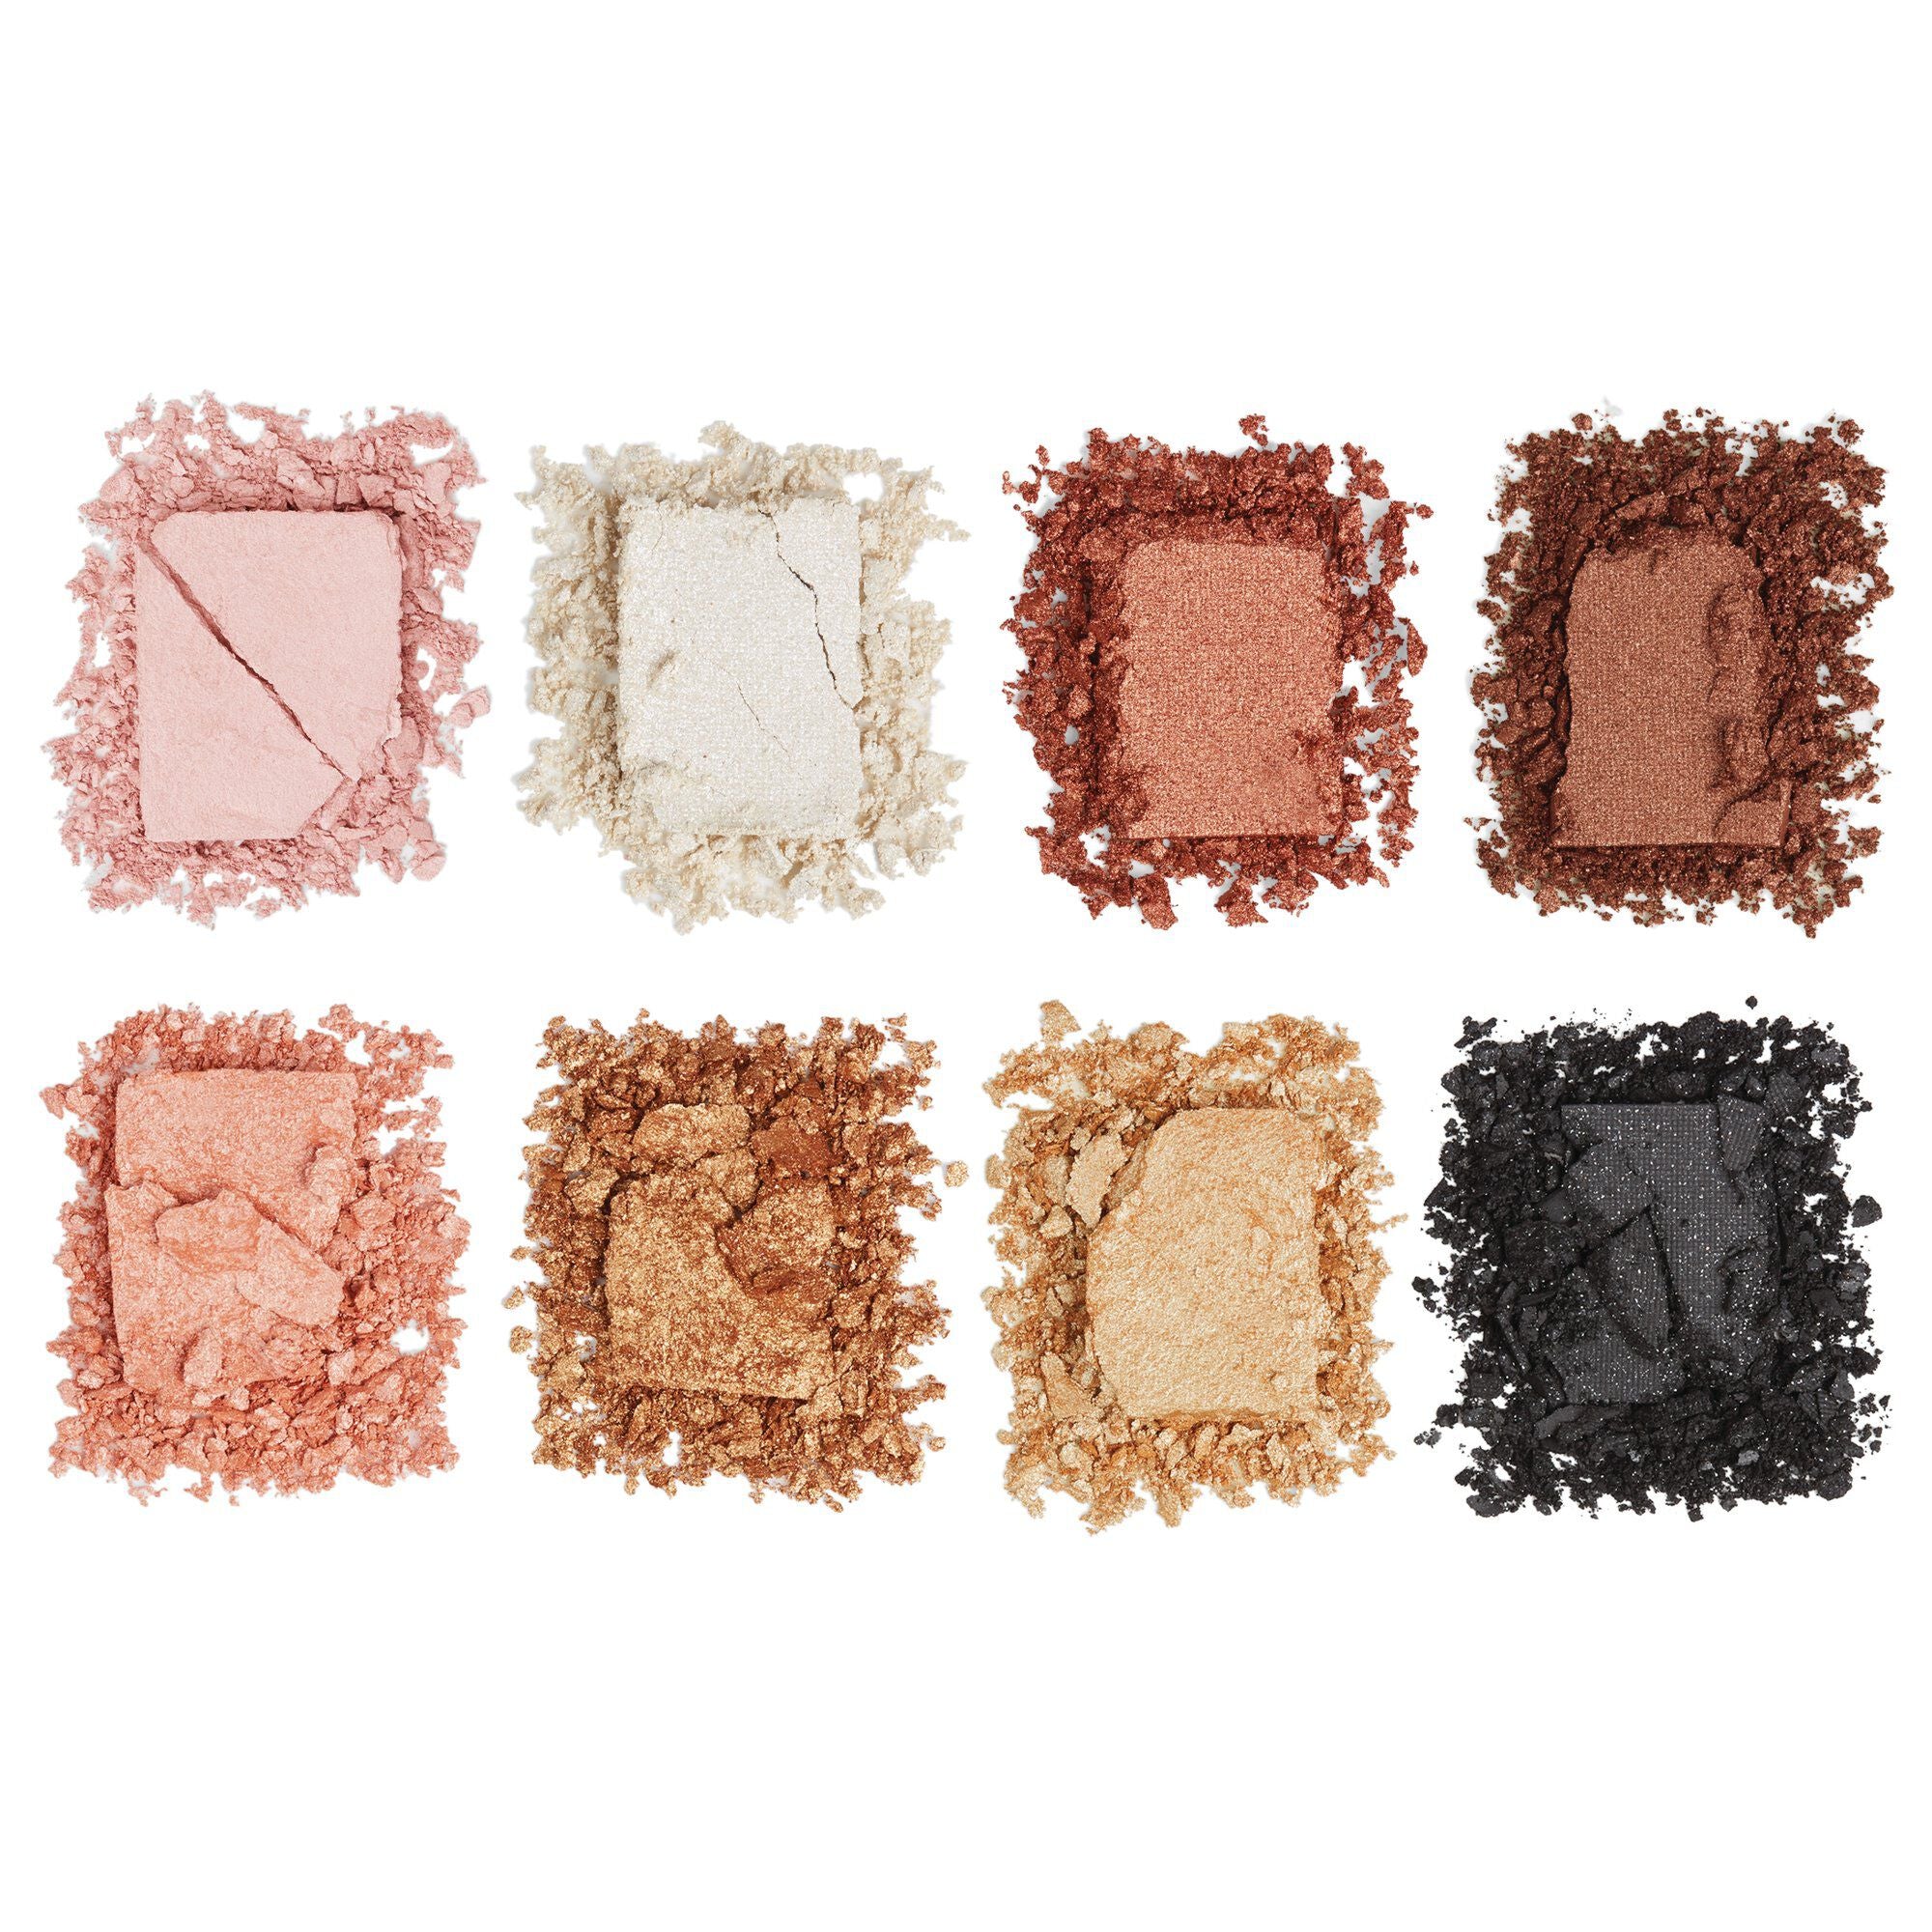 Reloaded  Affection eyeshadow Palette